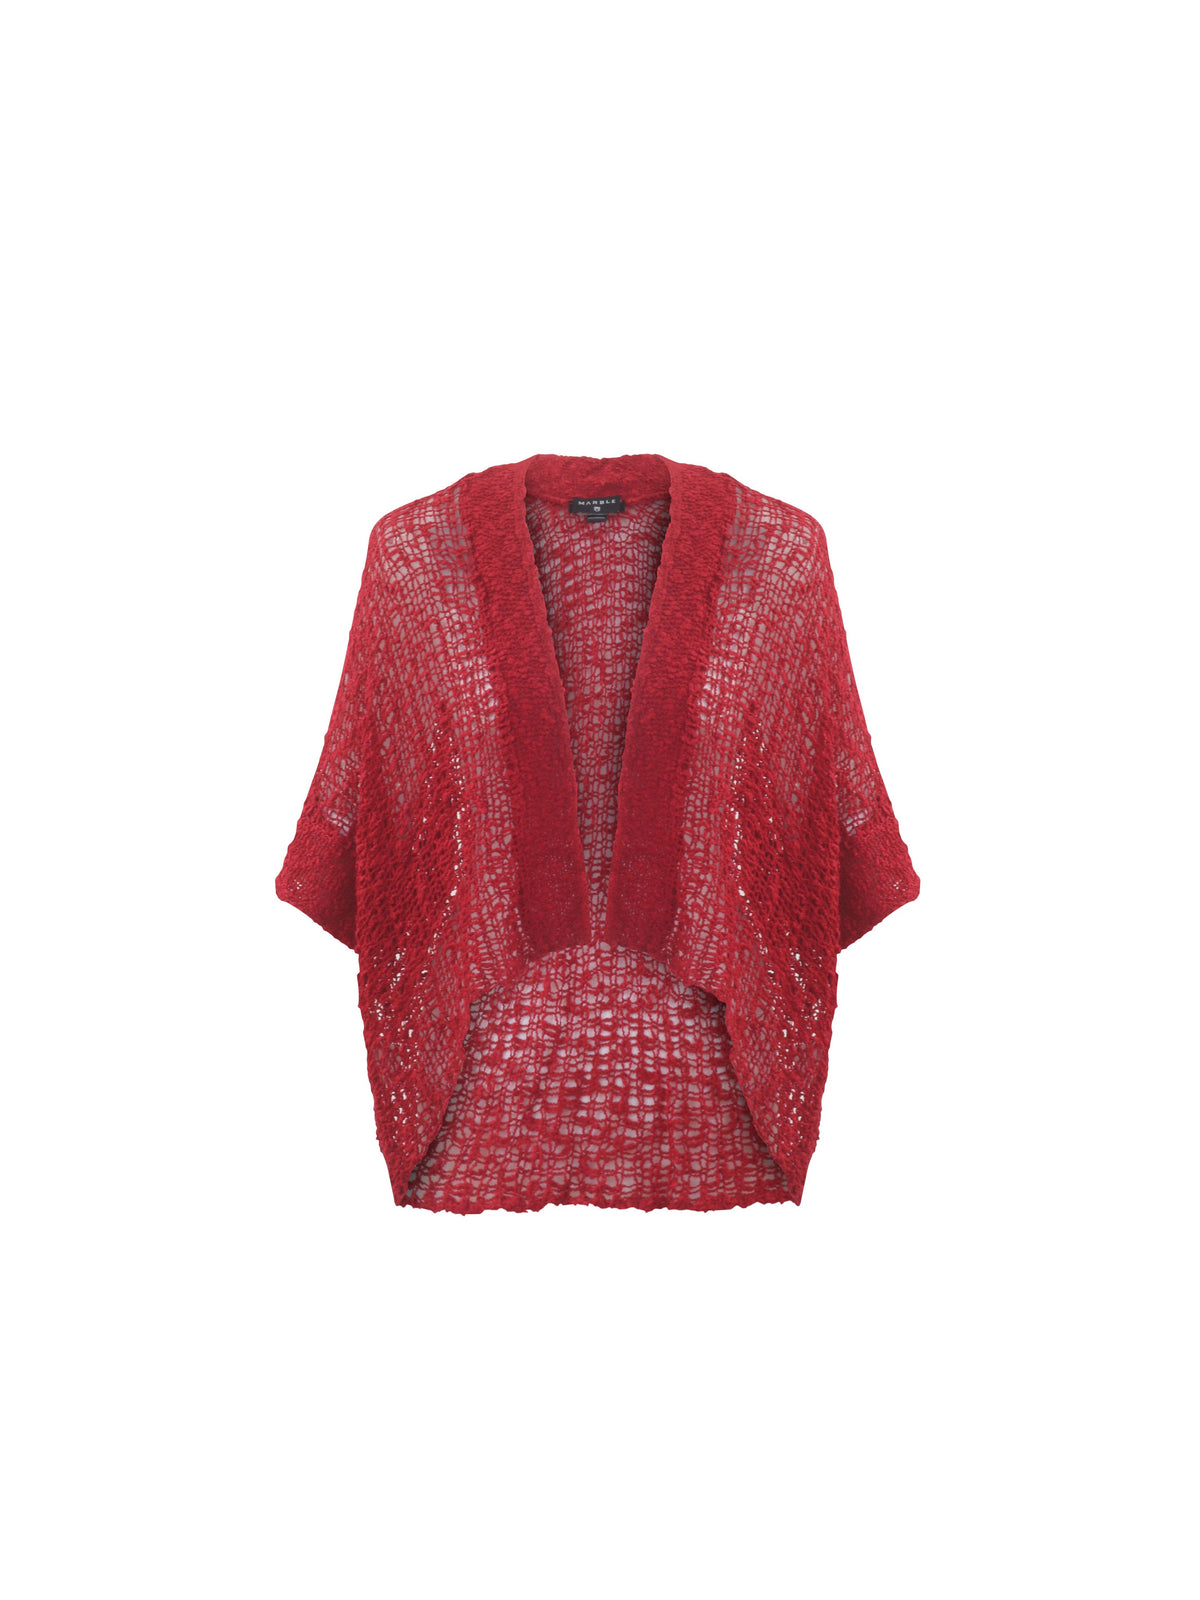 Marble Red Cardigan